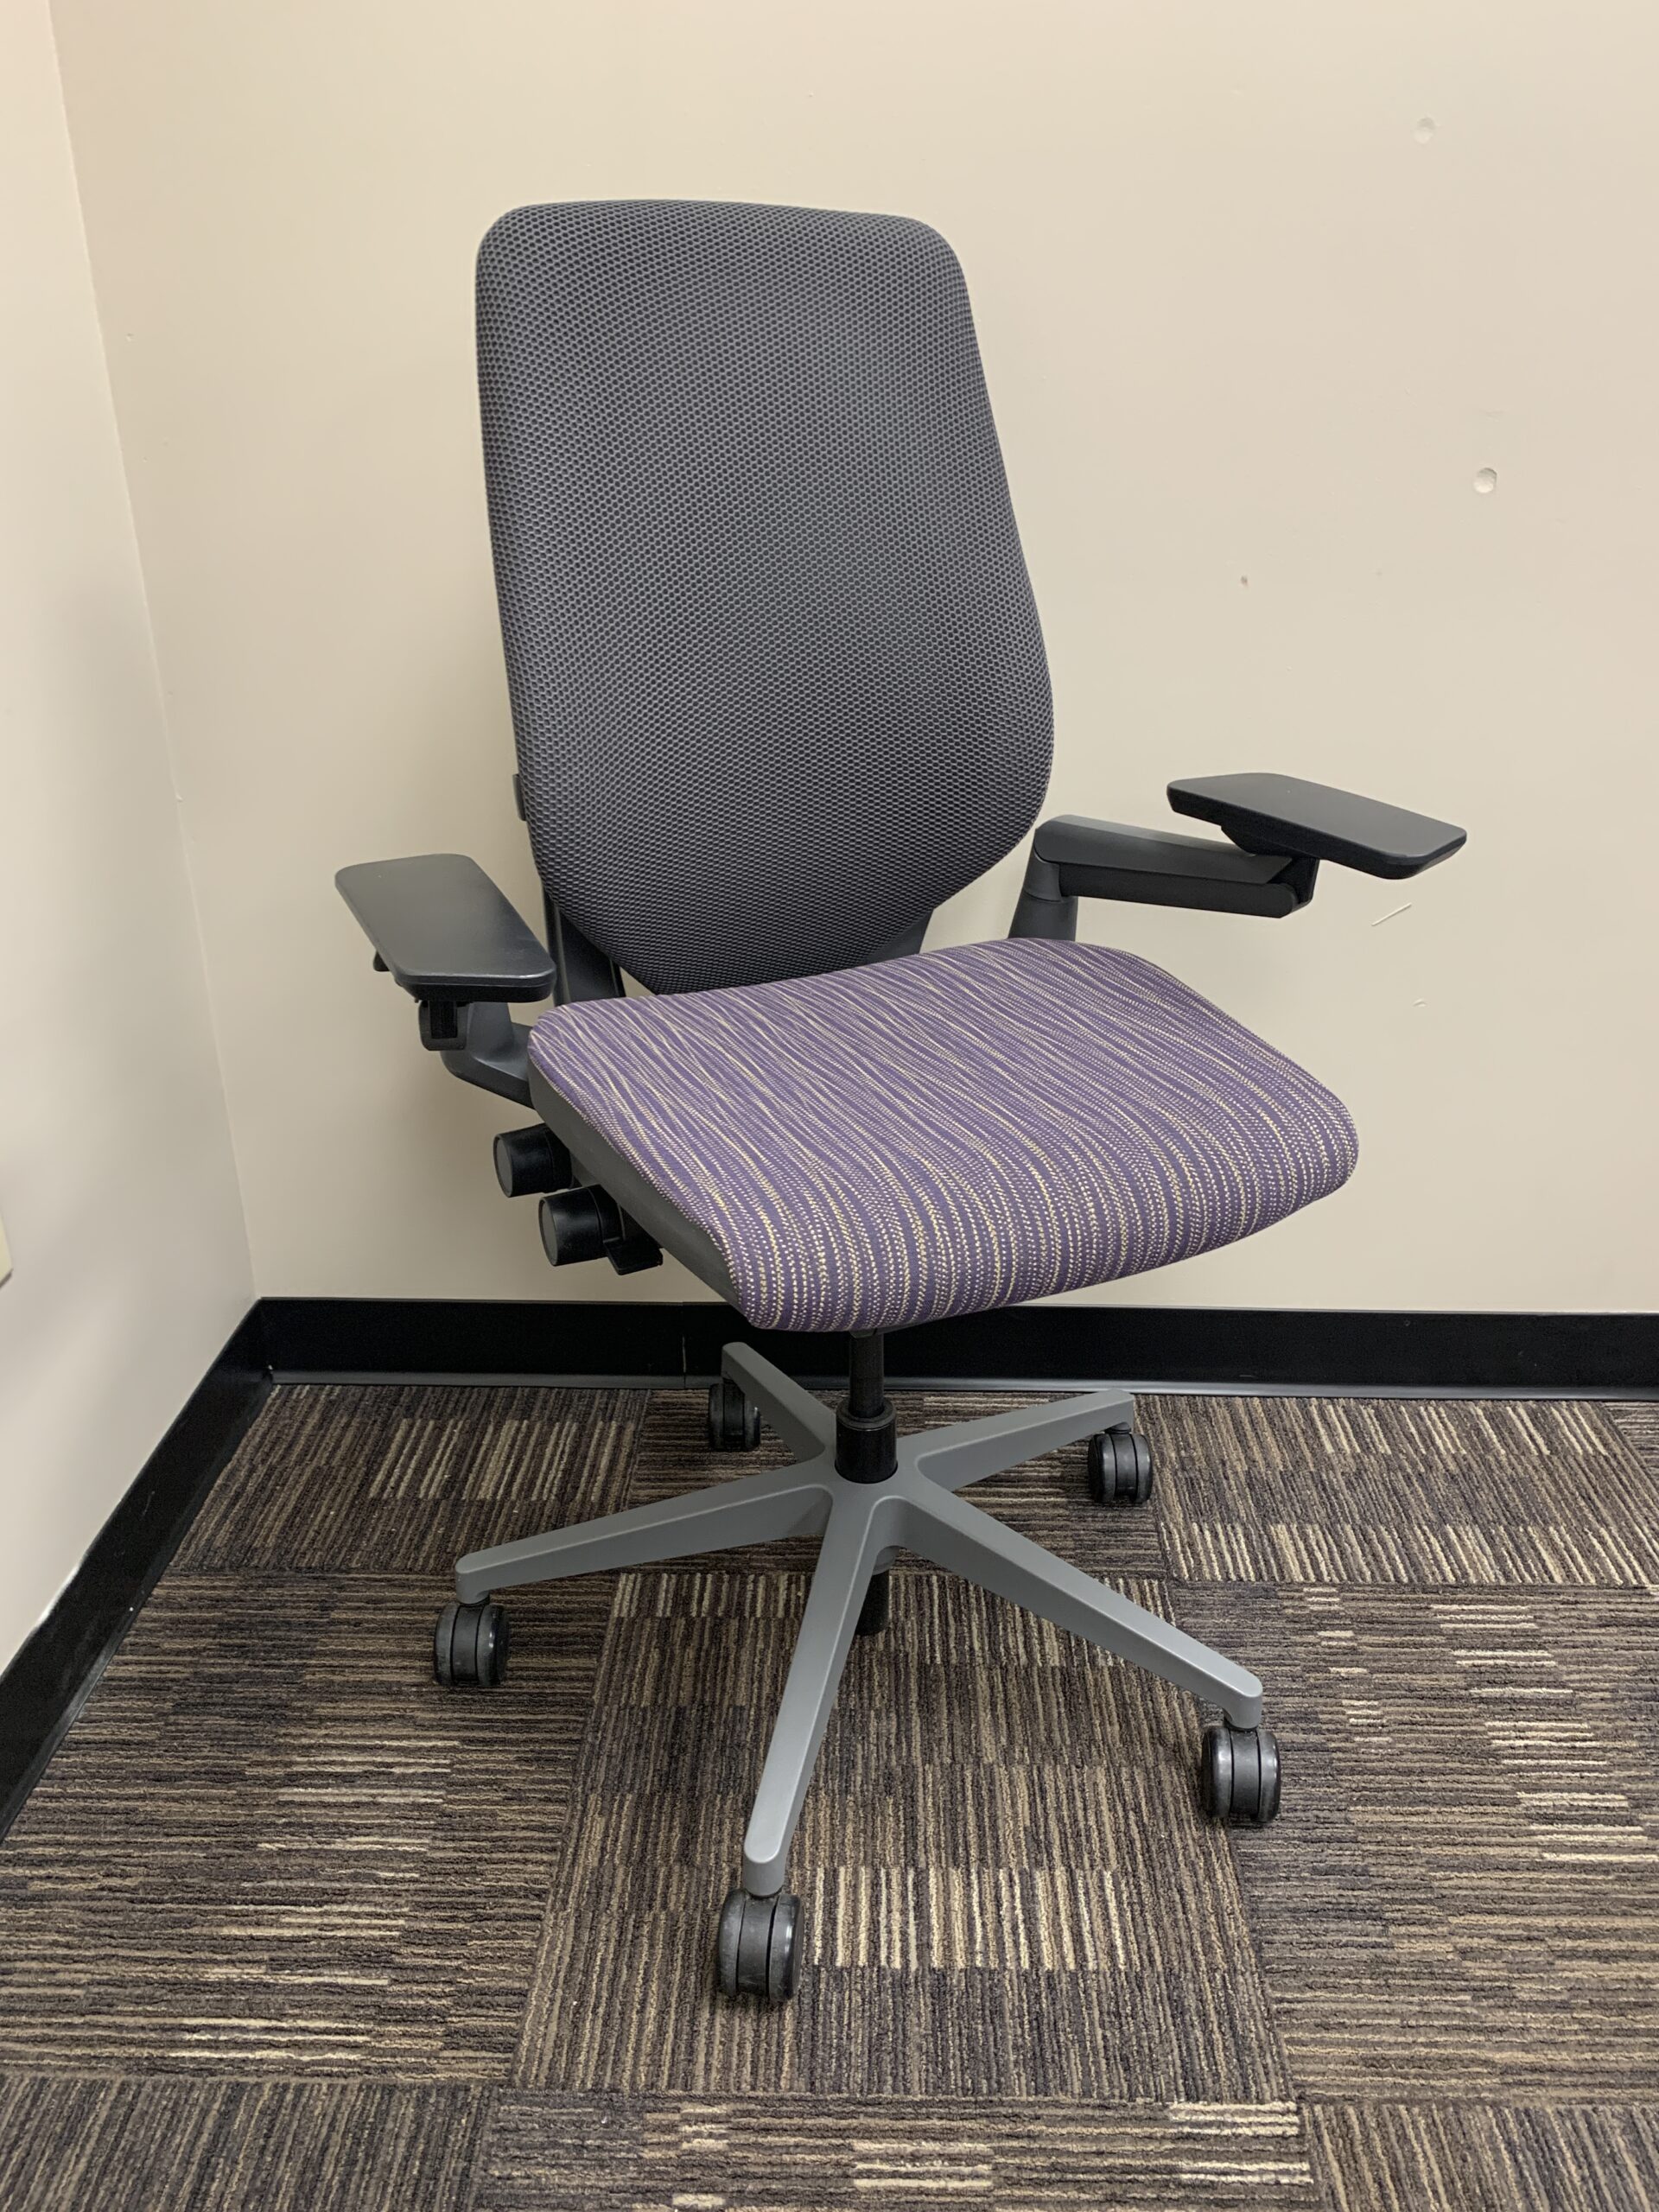 Used Steelcase Gesture Desk Chair - Office Furniture Resources